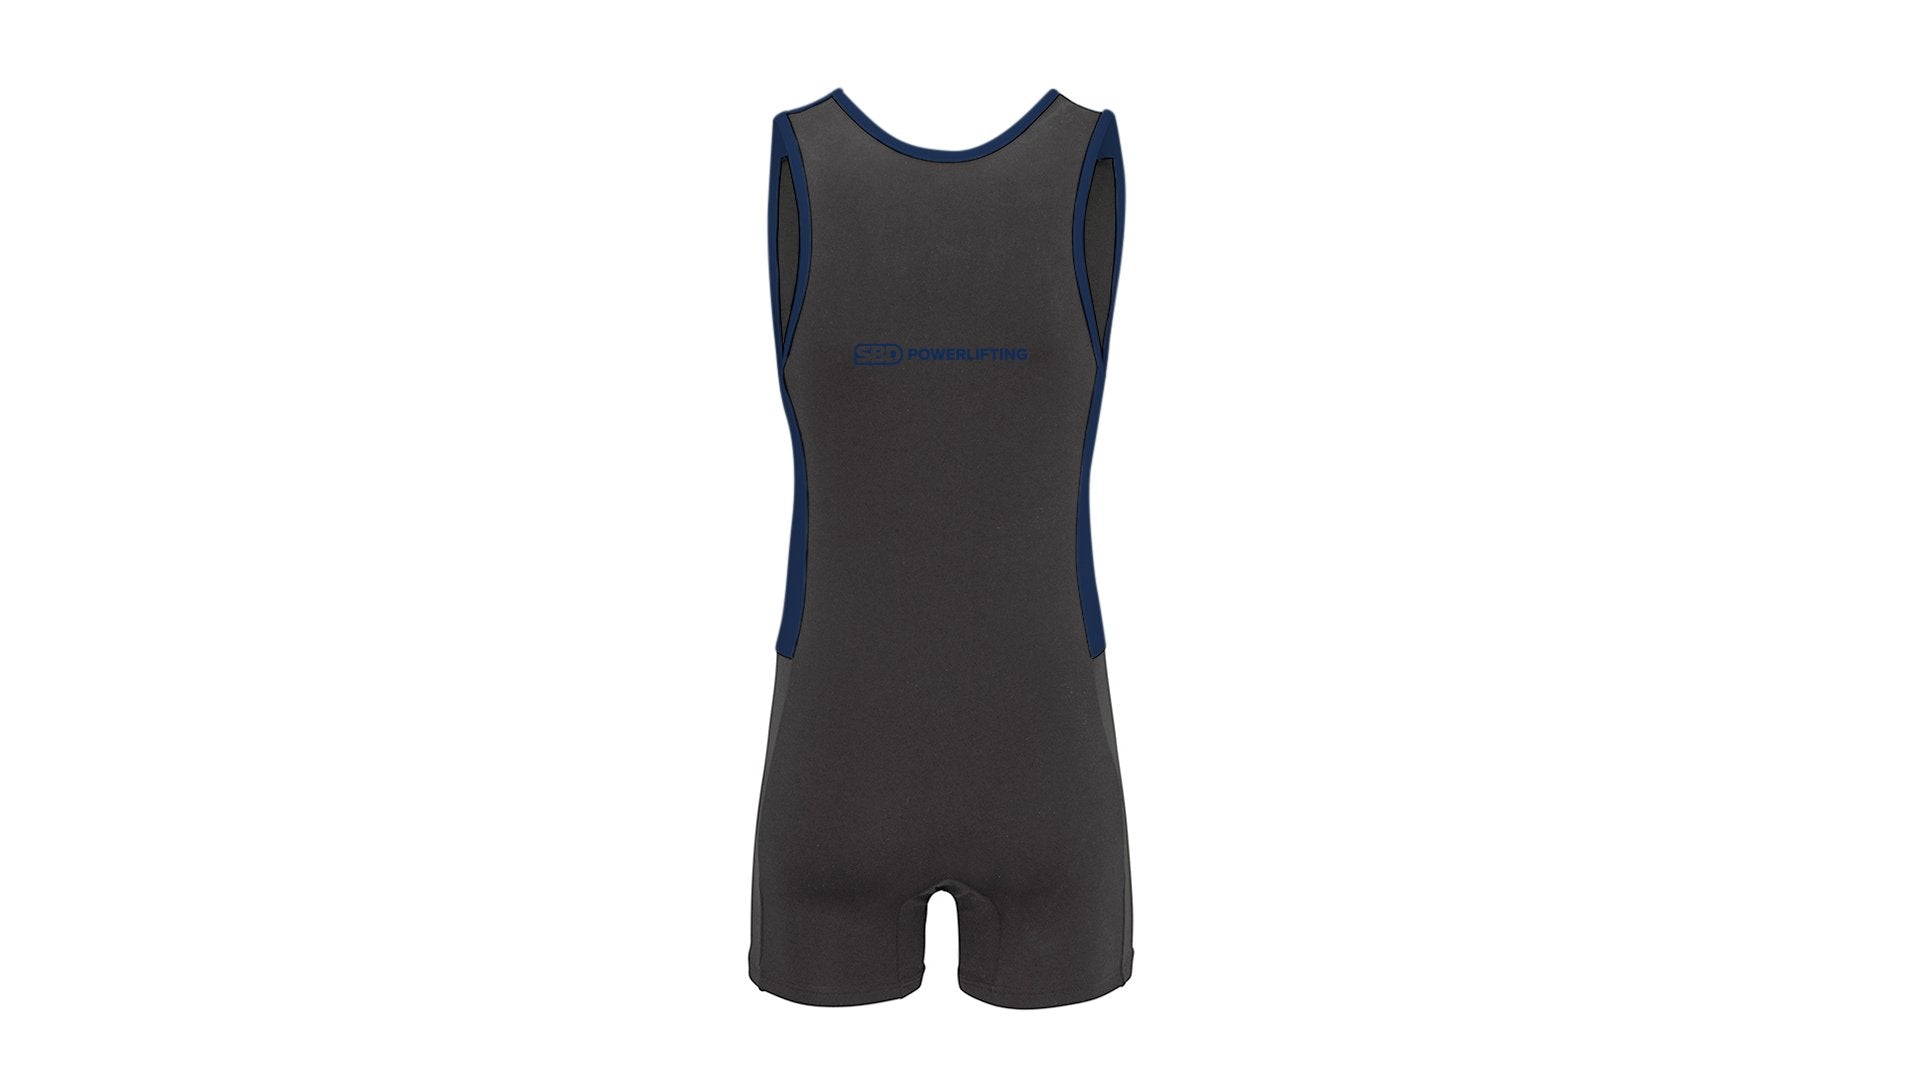 SBD Powerlifting Singlet Storm Limited Edition